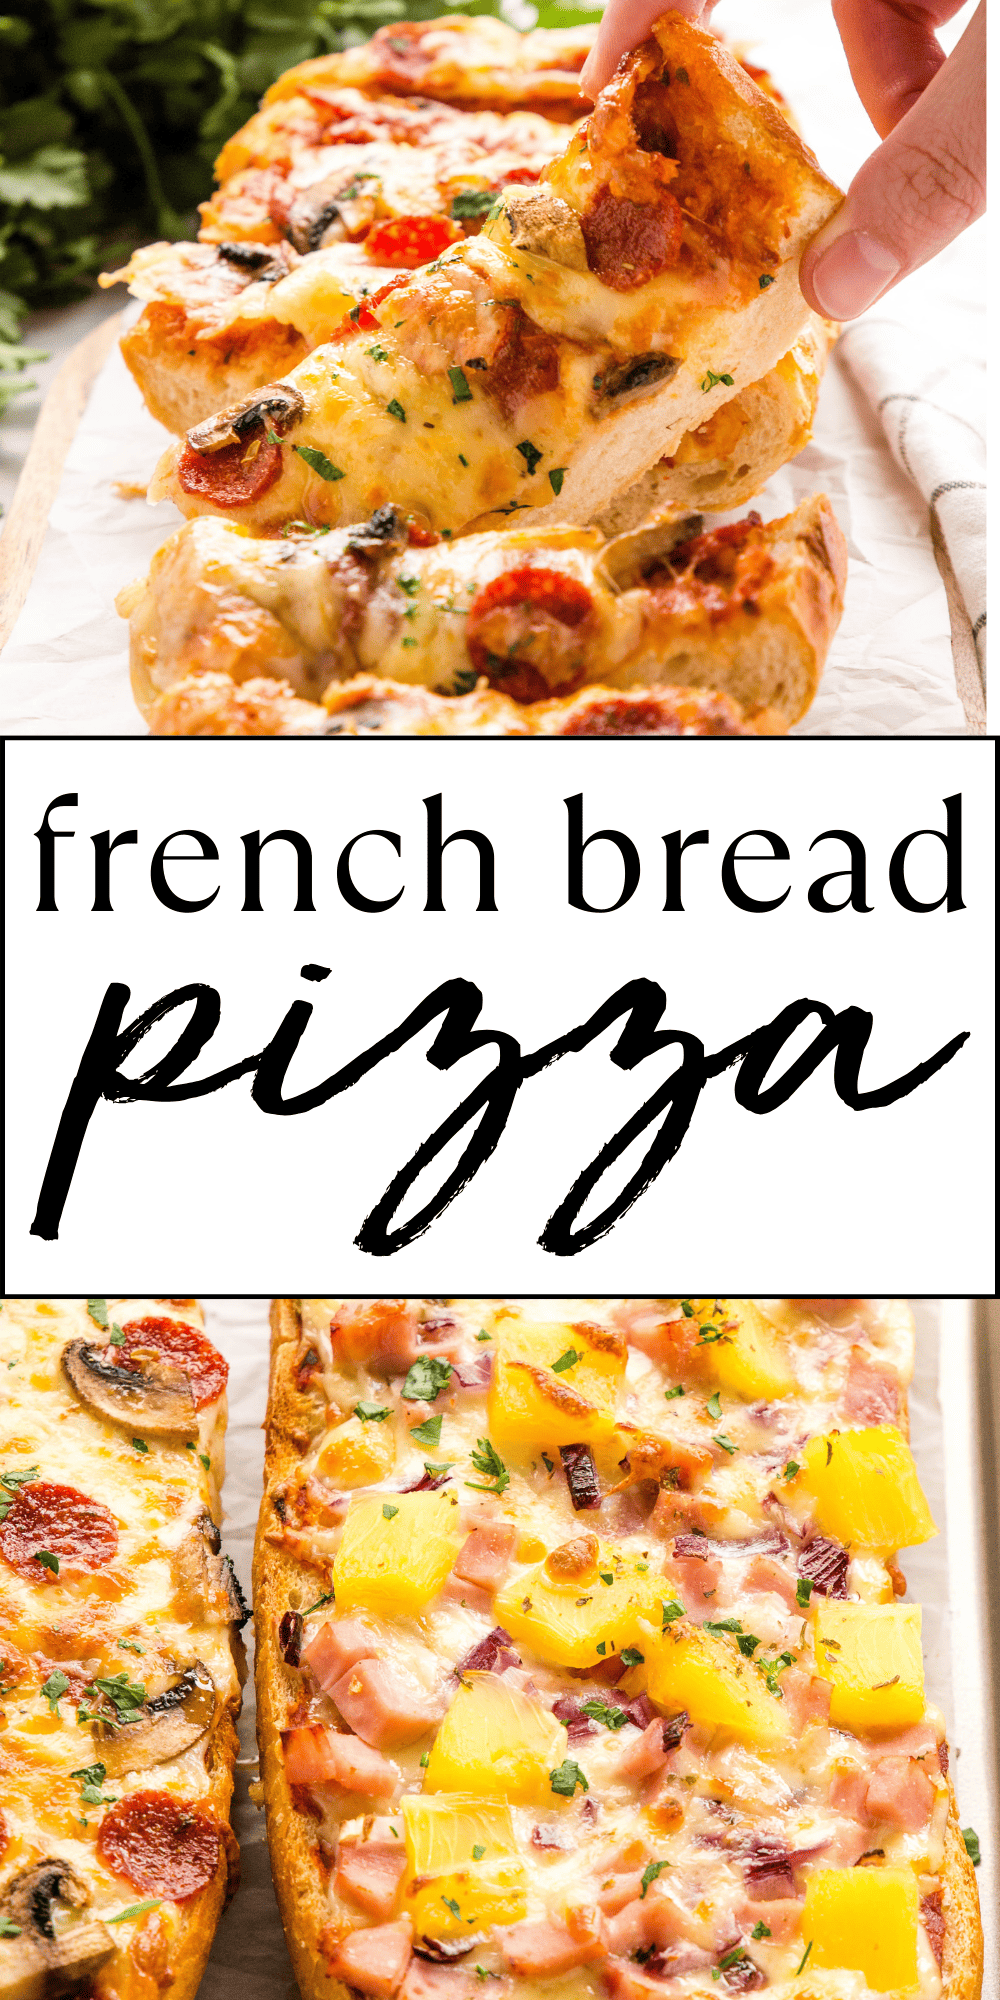 This French Bread Pizza Recipe is an easy family meal idea! Pick your favourite toppings for this budget-friendly 30-minute weeknight dinner! Recipe from thebusybaker.ca! #pizzarecipe #frenchbreadpizza #easypizza #homemadepizza #easydinner #mealidea #simplemeal #homemademeal #familymeal #familydinner #weeknightmeal #easymeal#foodforkids via @busybakerblog